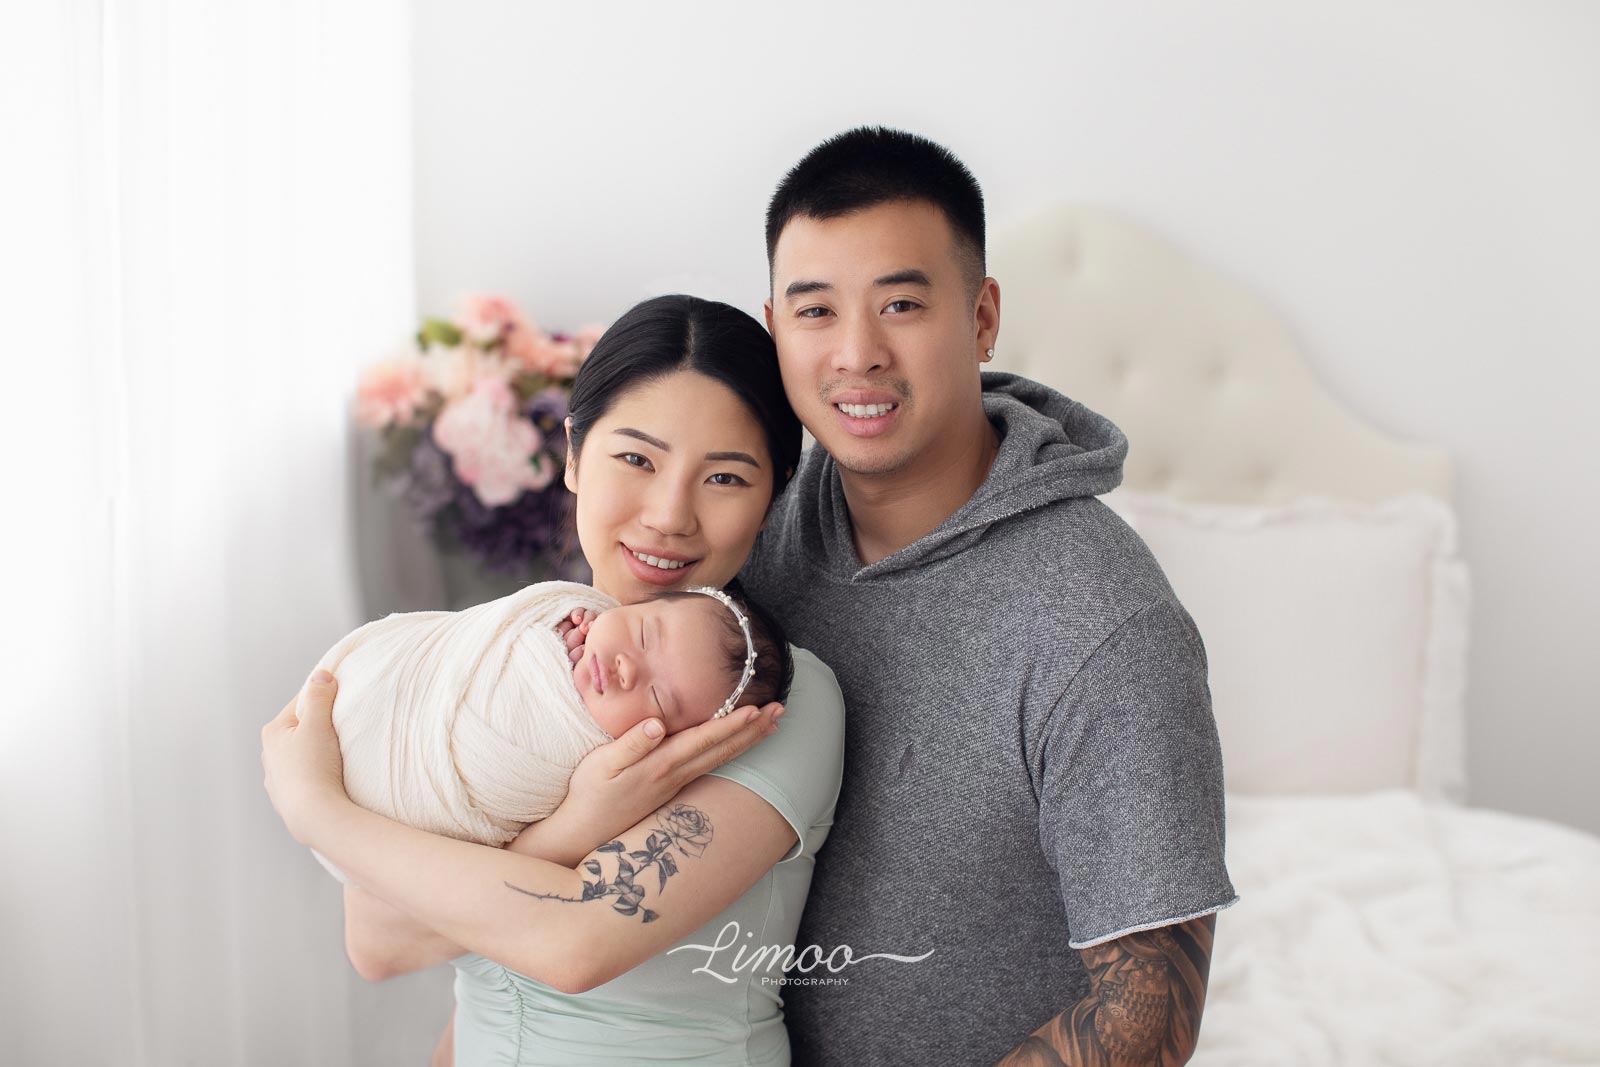 Limoo photography what to wear family photos newborn session bay area san jose